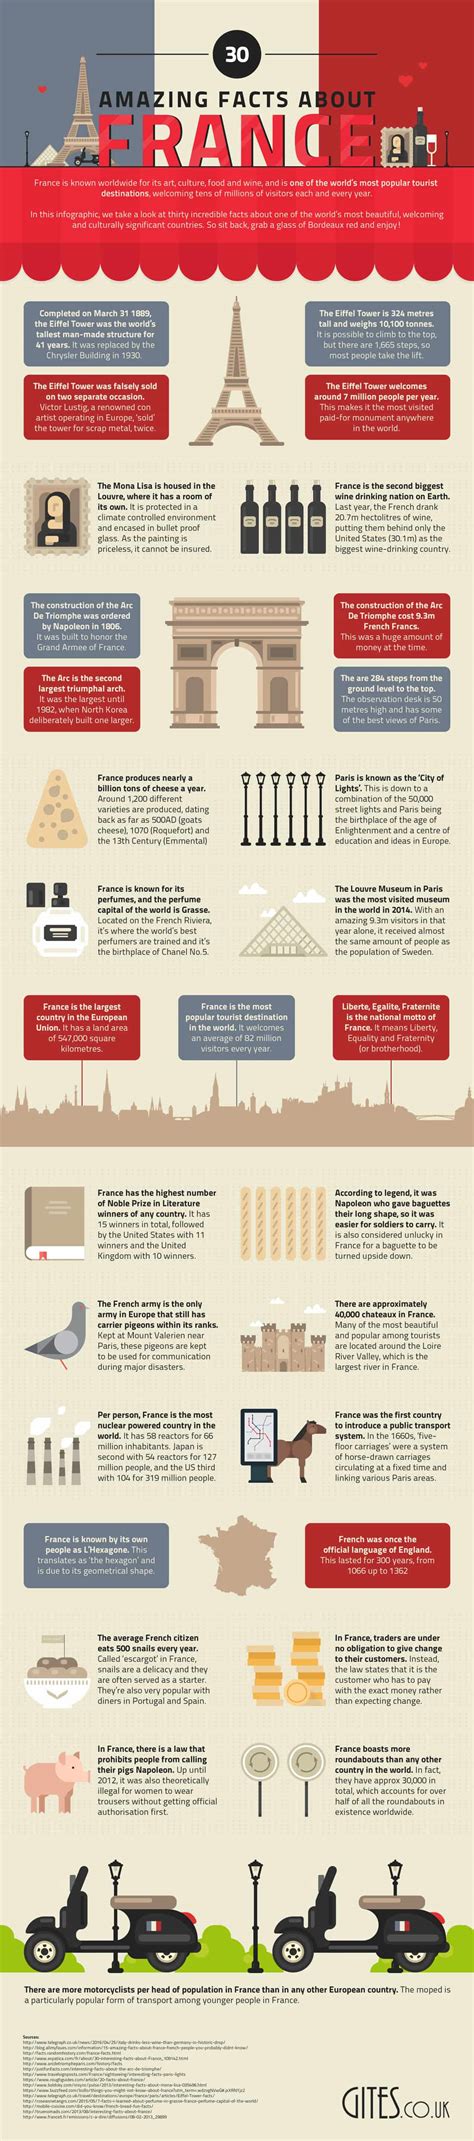 30 Amazing Facts About France Daily Infographic